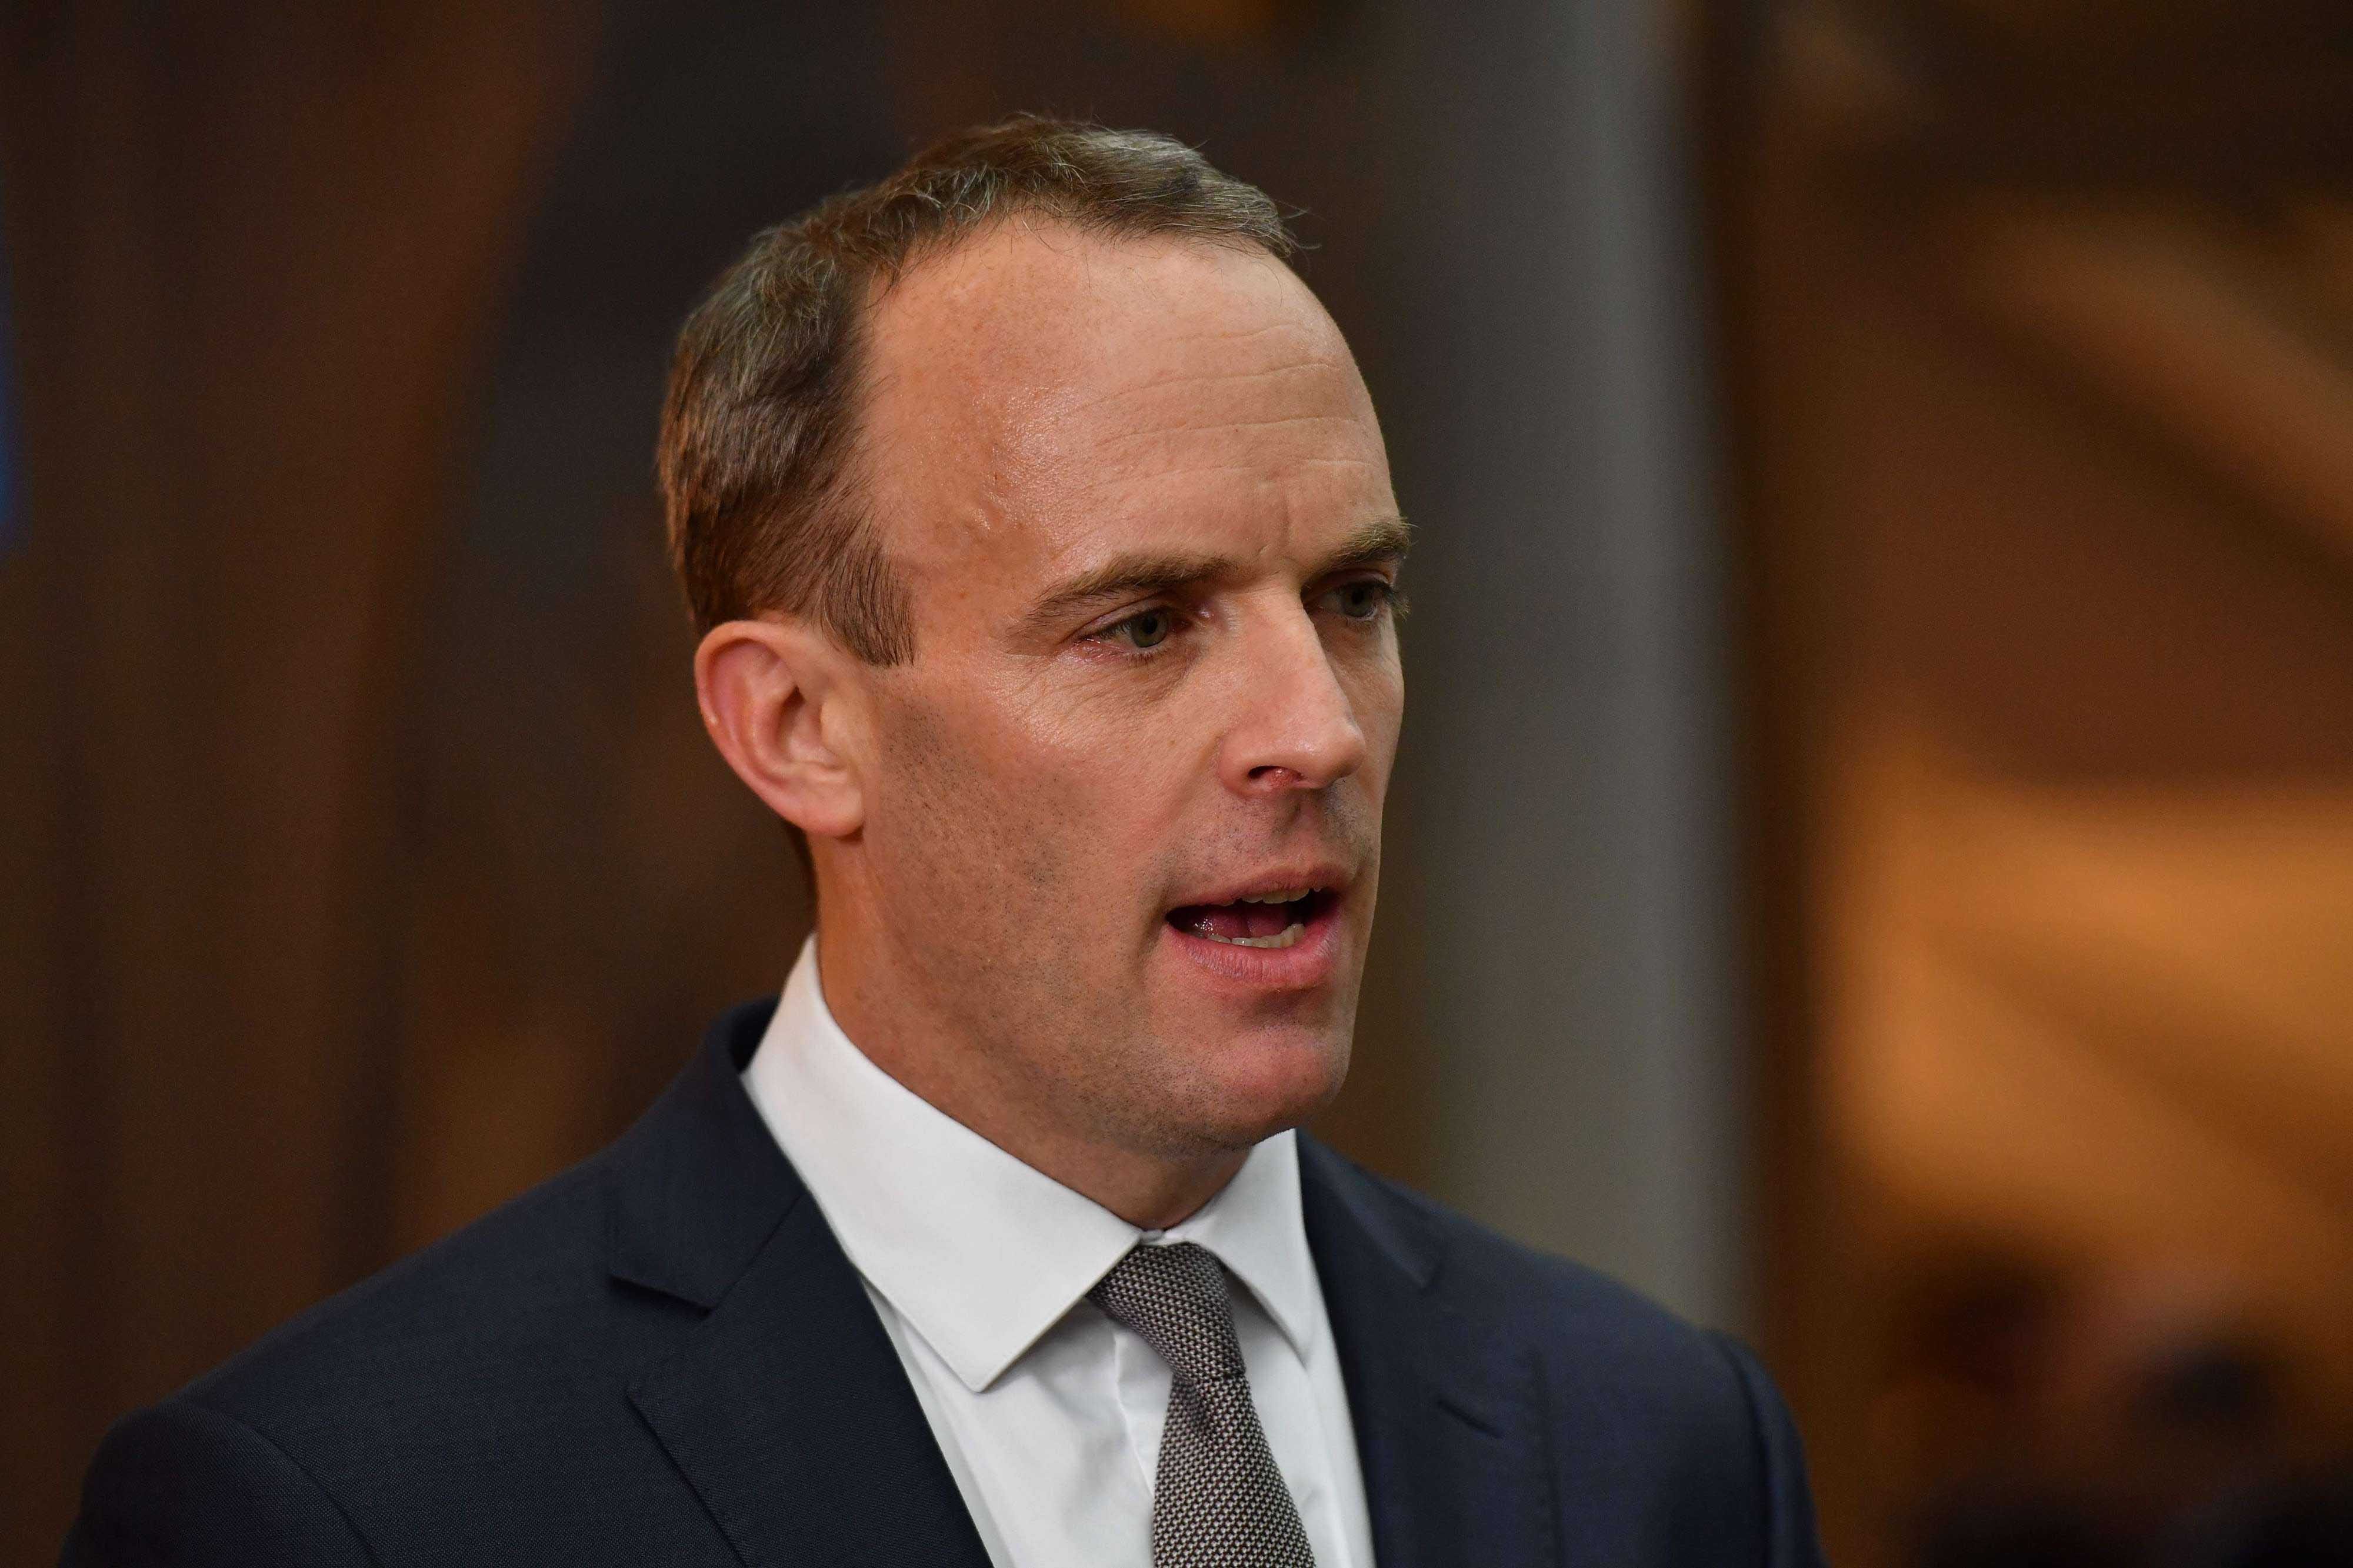 "I don't think it's credible," Brexit Secretary Dominic Raab told the BBC